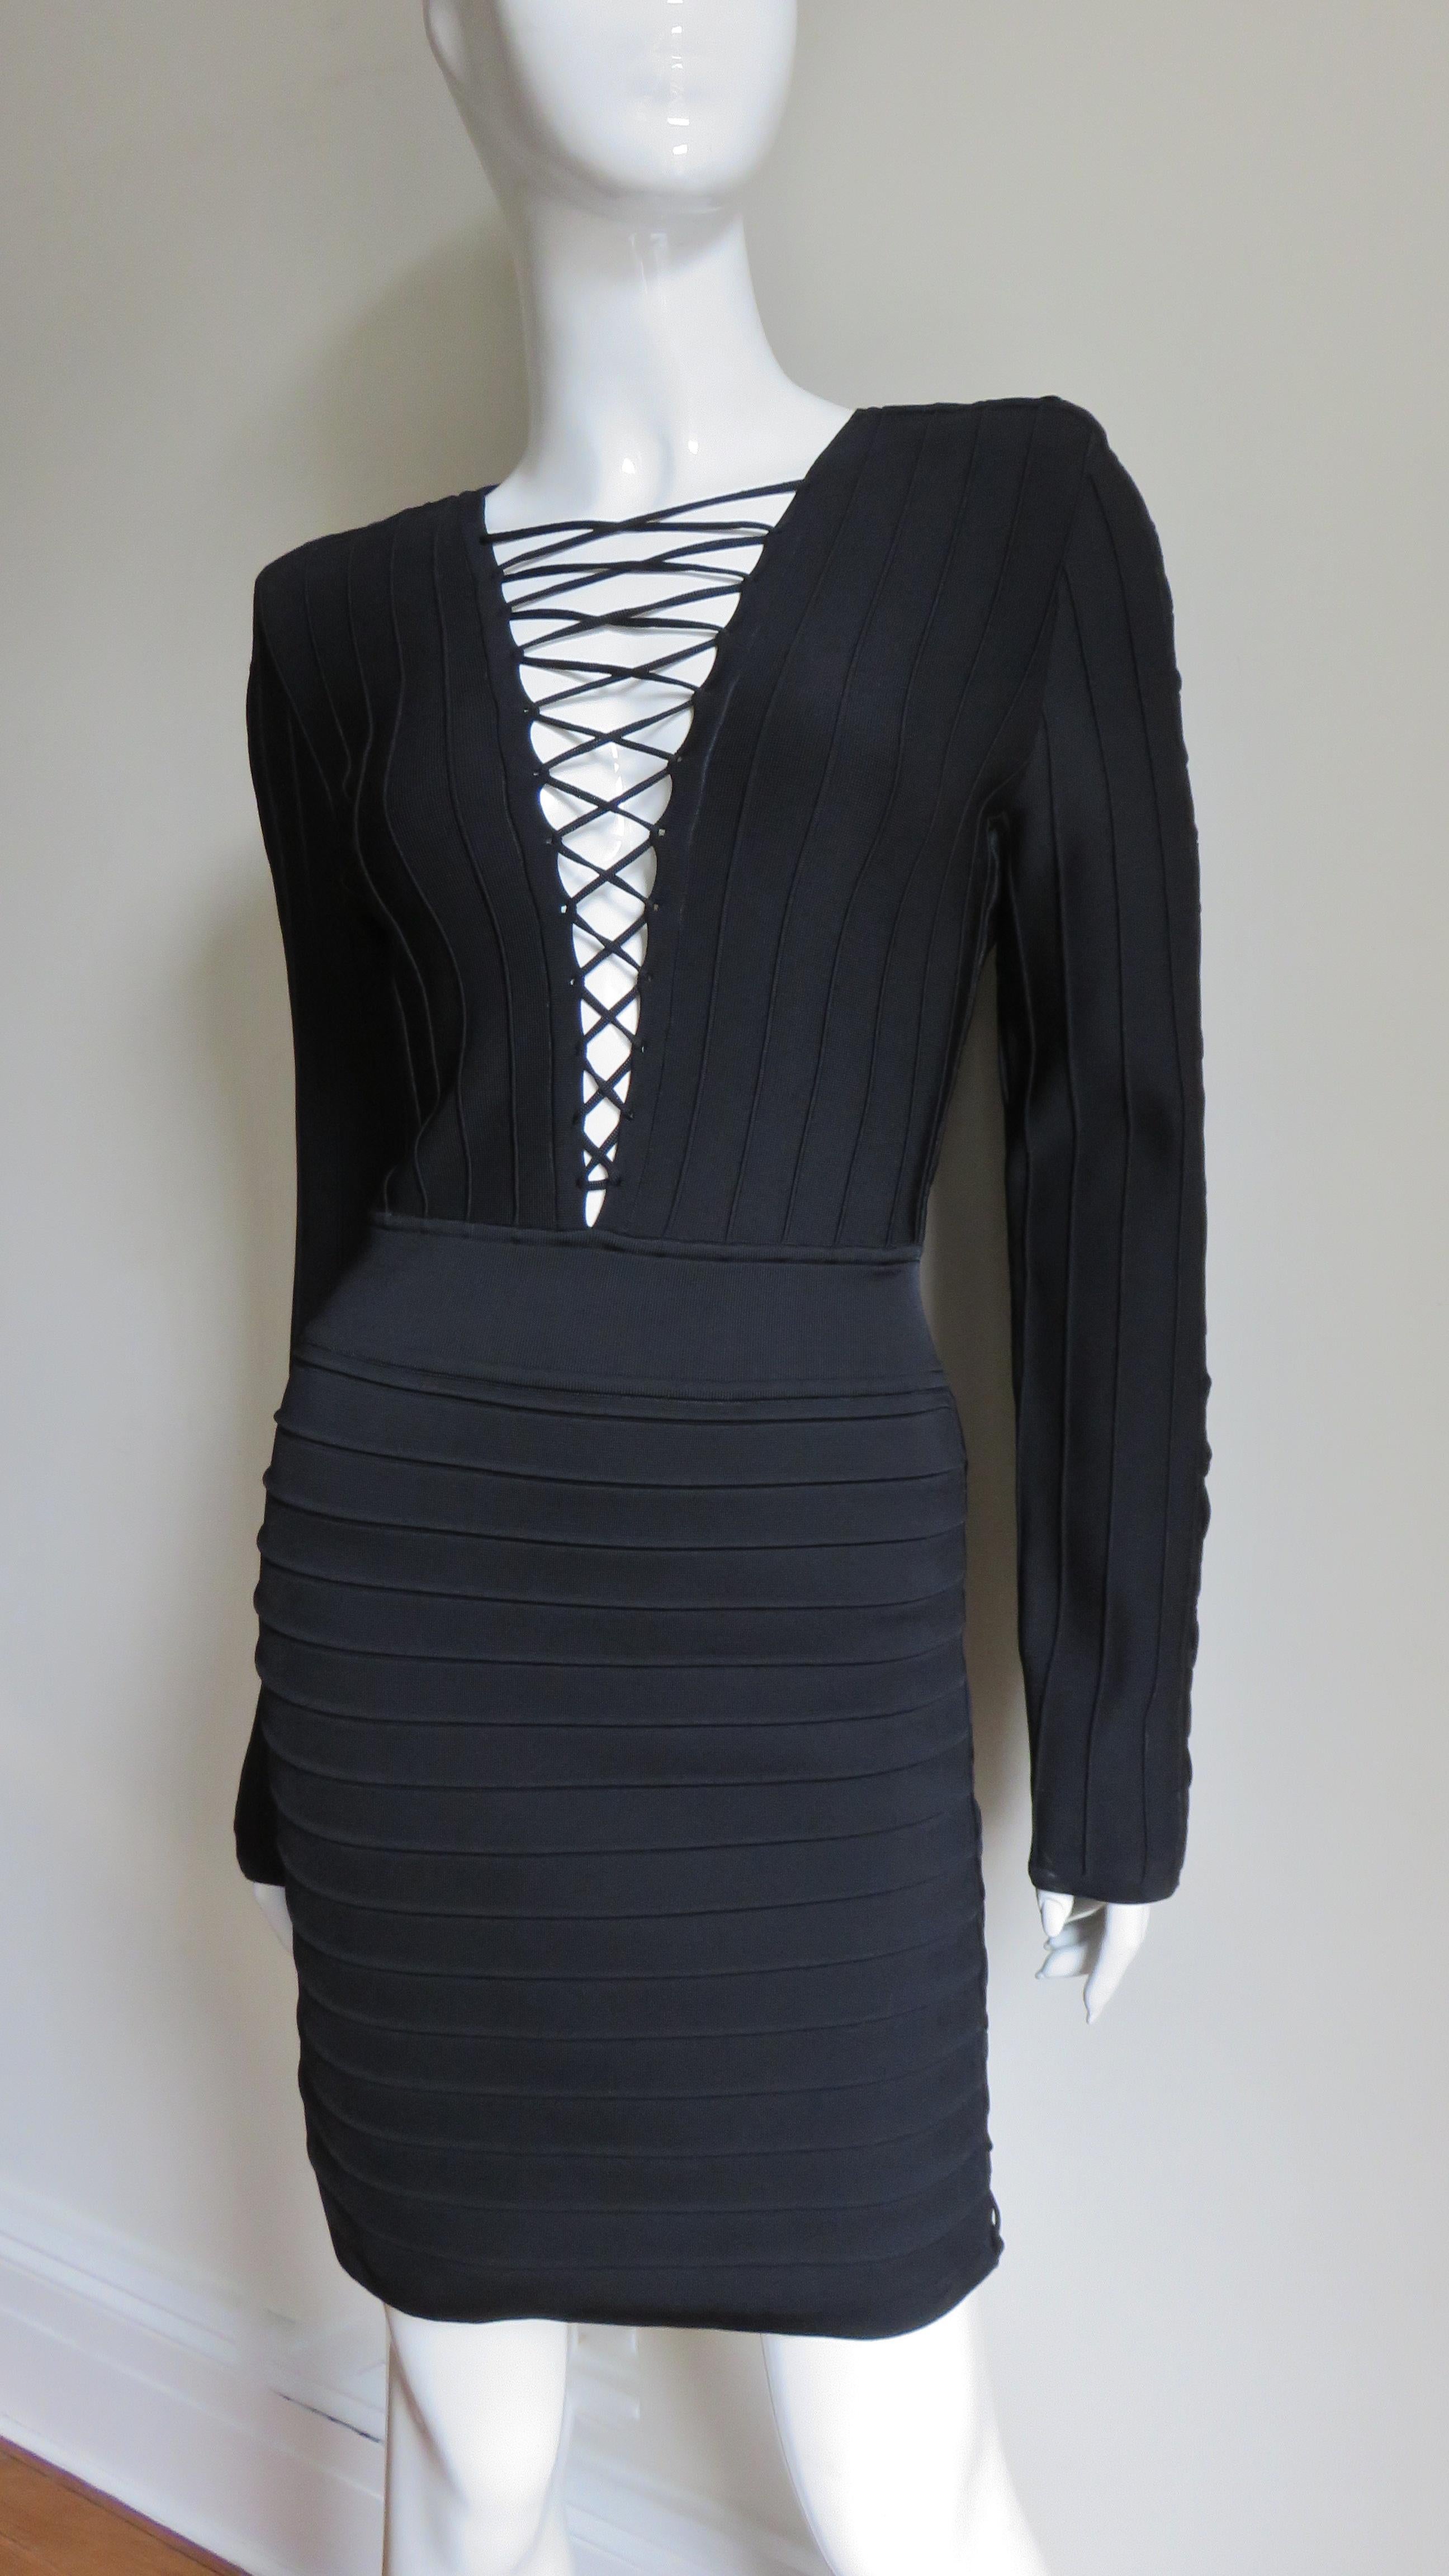 A fabulous black bandage dress from Pierre Balmain.  It is fitted and has a plunging front neckline with adjustable lacing through to the waist.  There is lacing along the tops of the shoulders and sleeves to the wrists and from underarm to waist. 